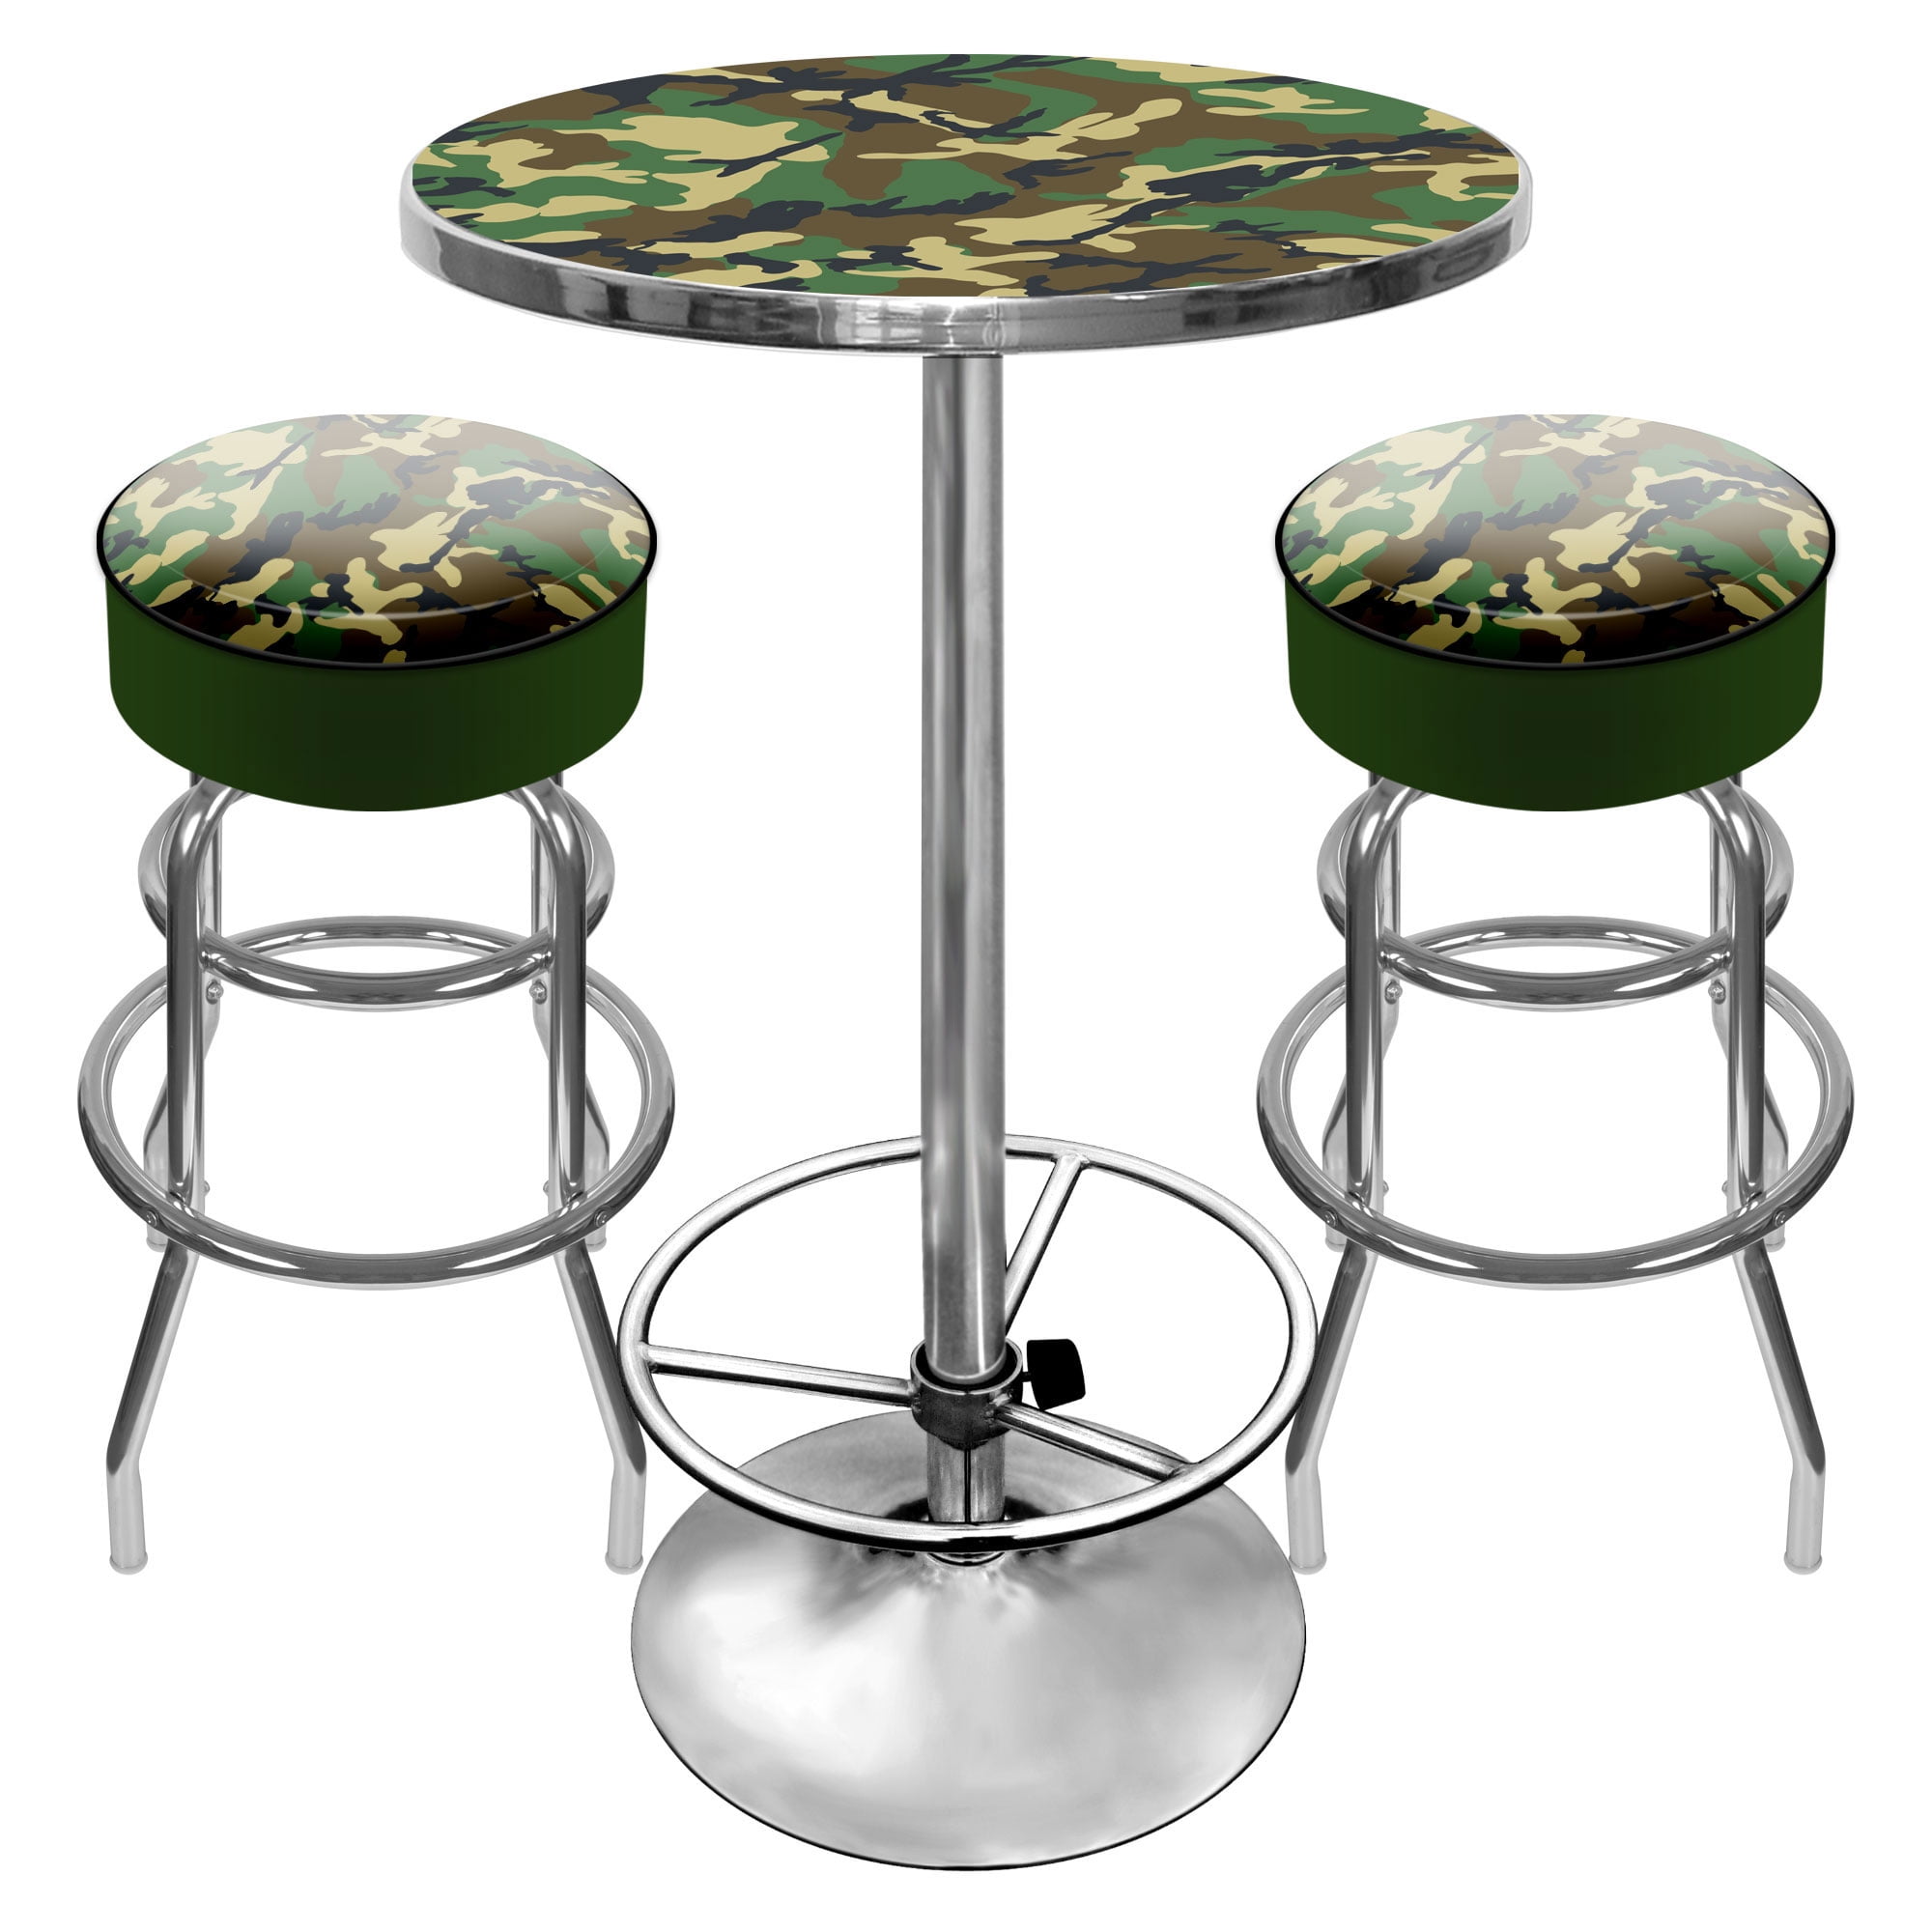 snack in 25 colors 2" SIDES kitchen W Bar Stool Cover vinyl or camo pub 